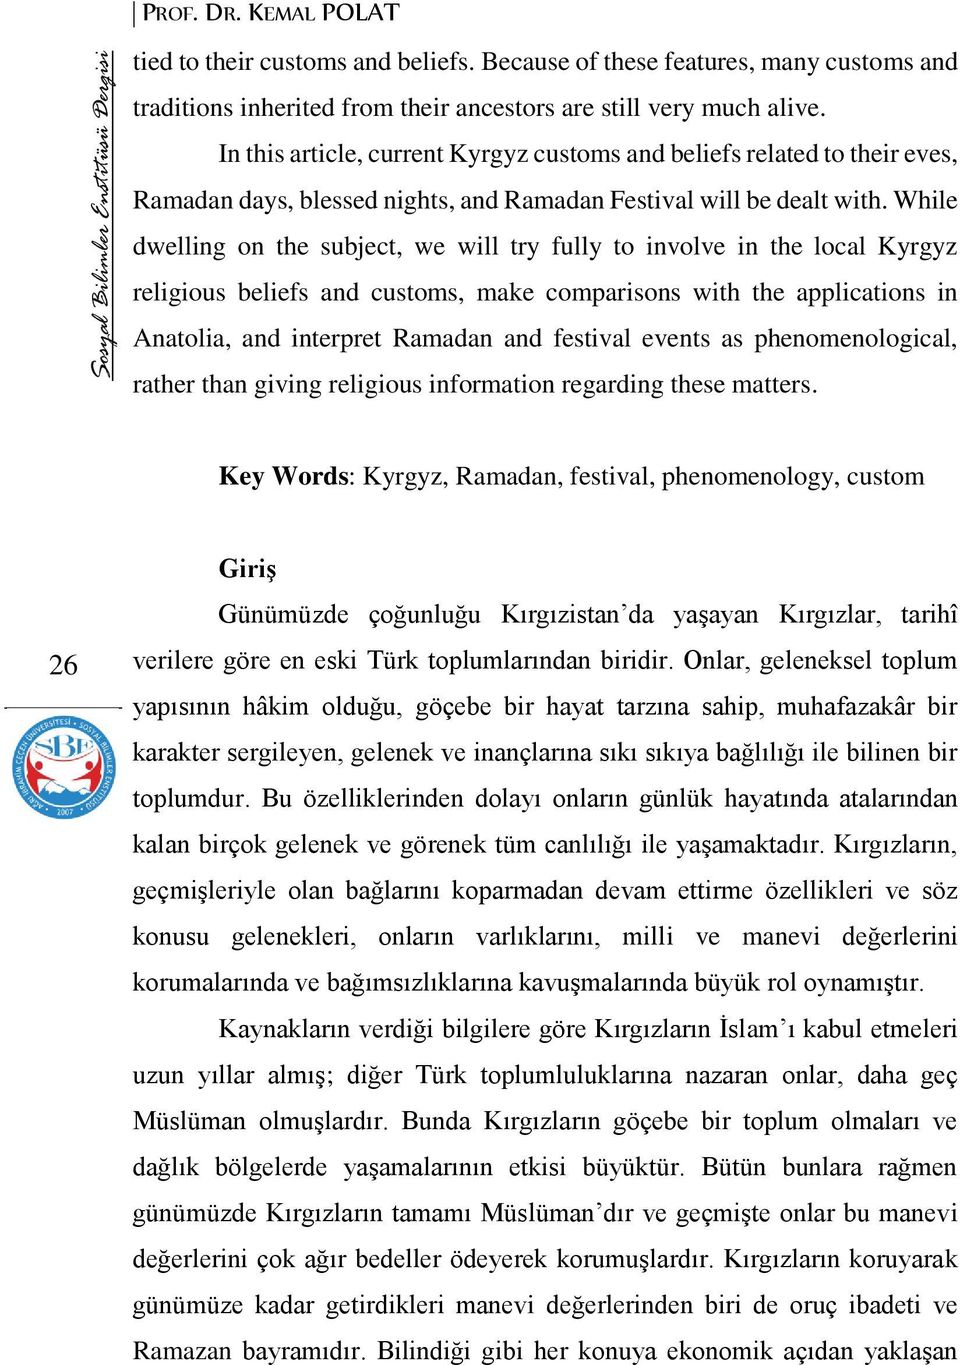 While dwelling on the subject, we will try fully to involve in the local Kyrgyz religious beliefs and customs, make comparisons with the applications in Anatolia, and interpret Ramadan and festival